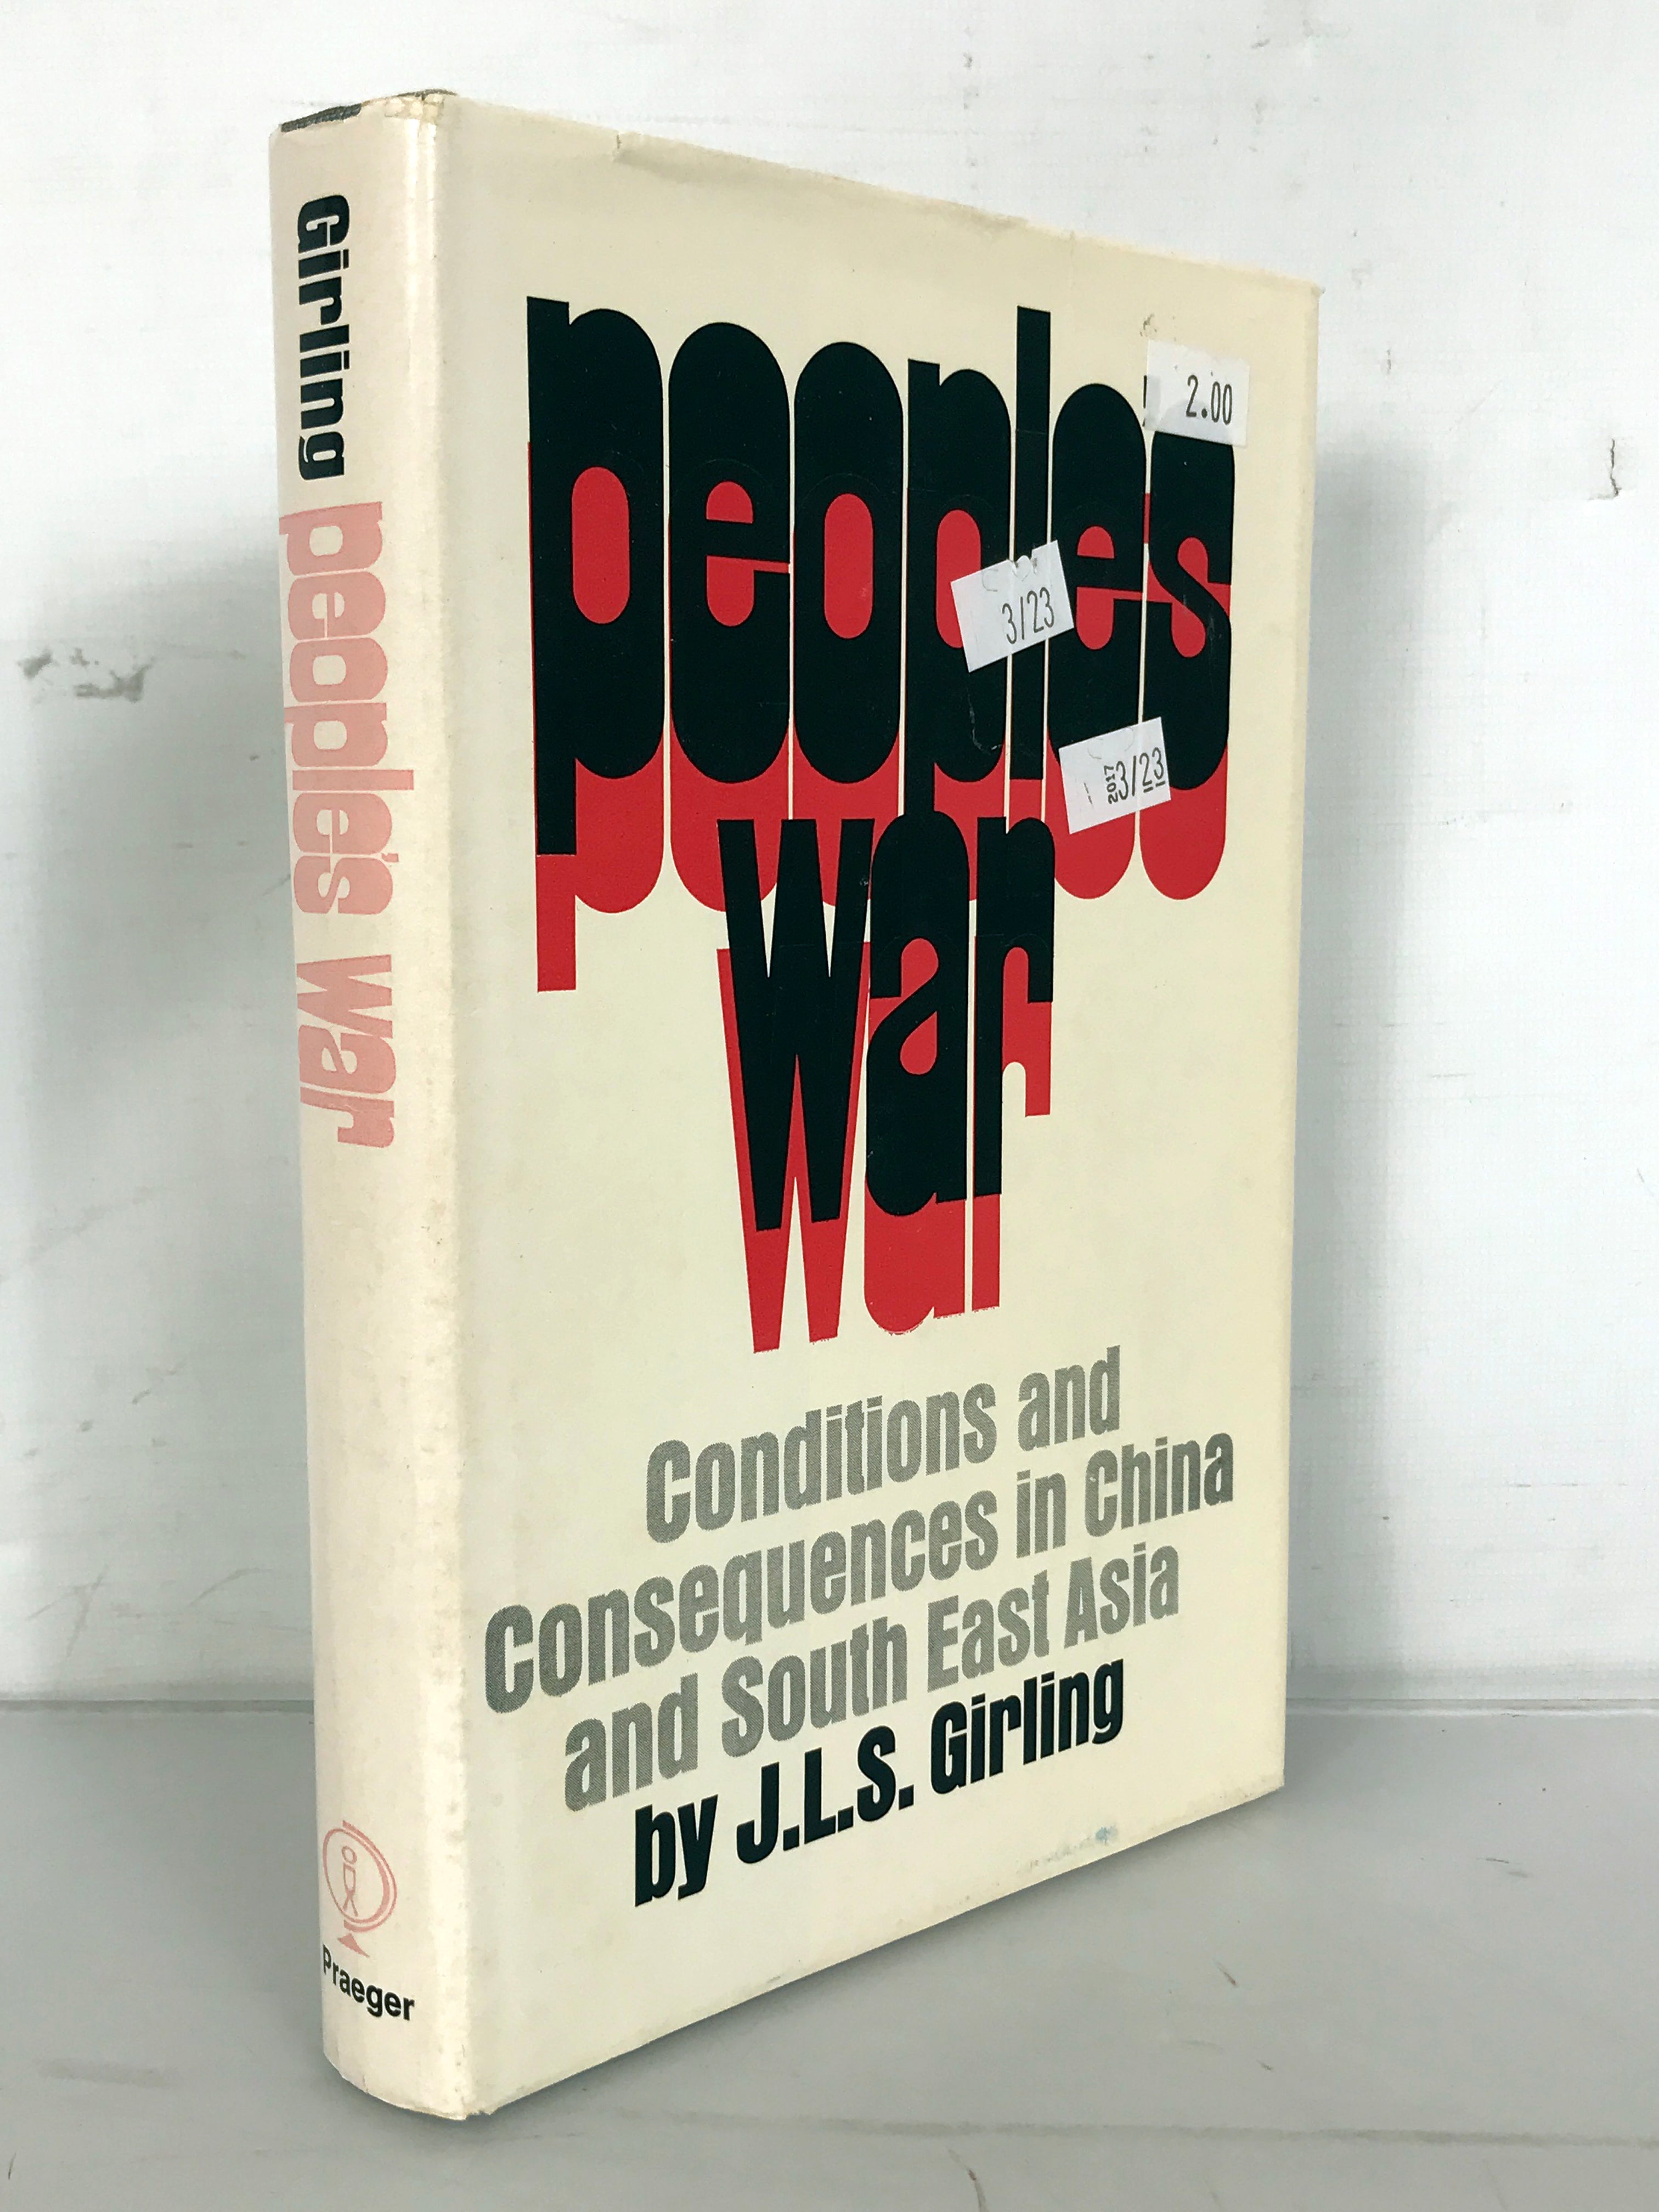 People's War Conditions and Consequences in China and South East Asia 1969 HC DJ